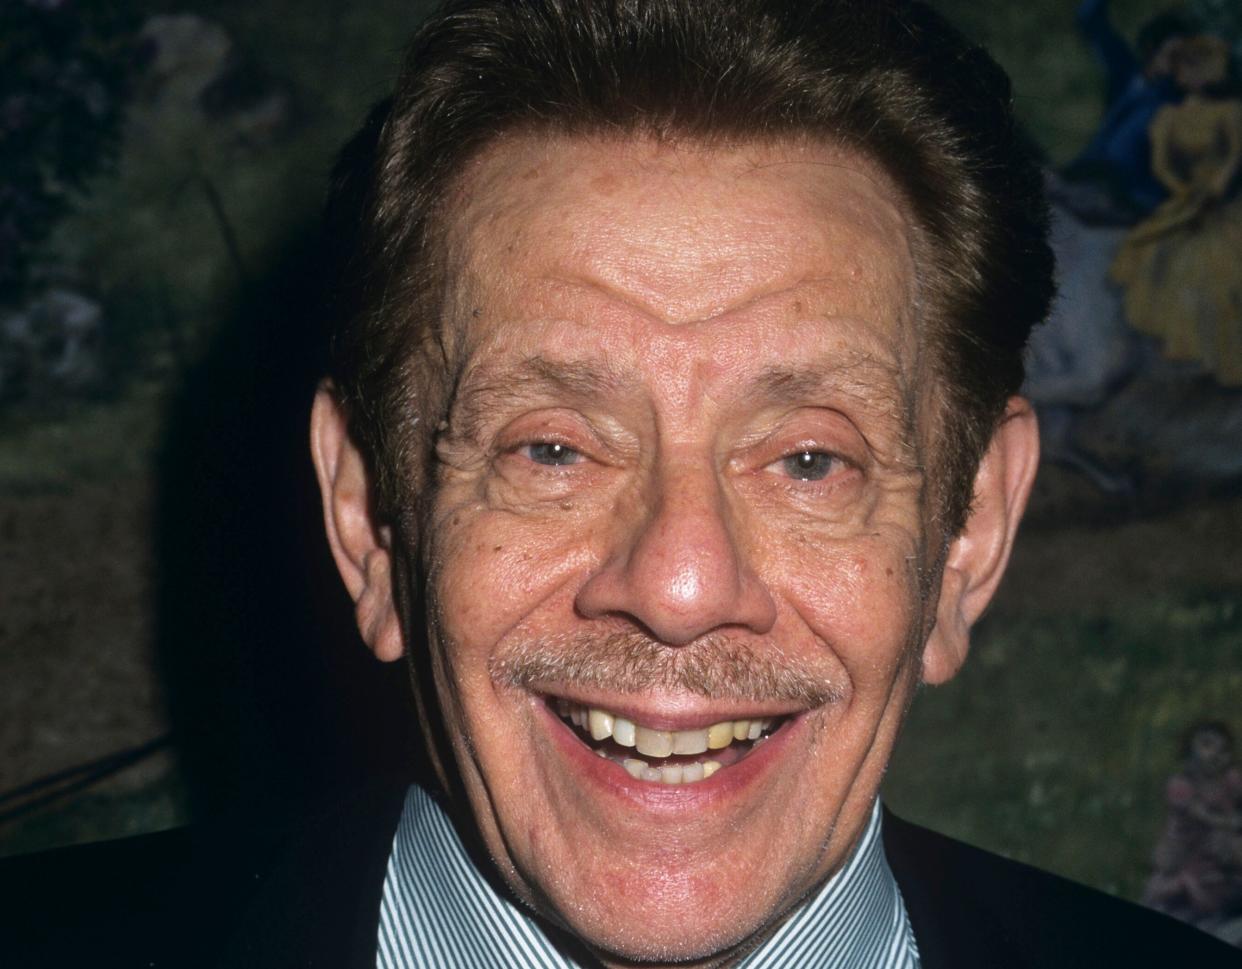 Jerry Stiller, the comedic legend who played hilariously crusty fathers on &ldquo;Seinfeld&rdquo; and &ldquo;The King Of Queens,&rdquo; and was the actual father to actor Ben Stiller, died on May 11, 2020 at 92.